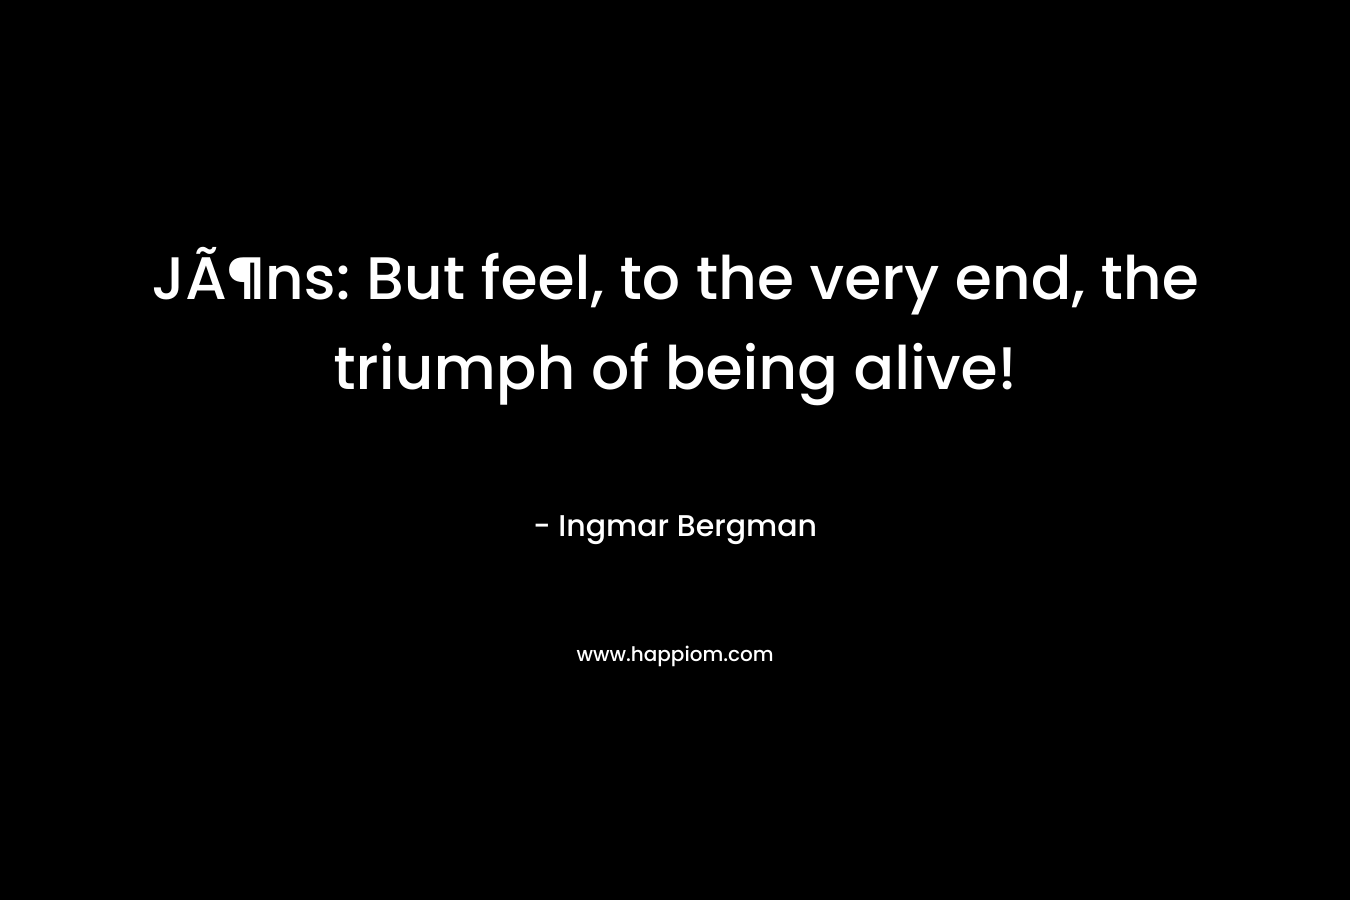 JÃ¶ns: But feel, to the very end, the triumph of being alive! – Ingmar Bergman